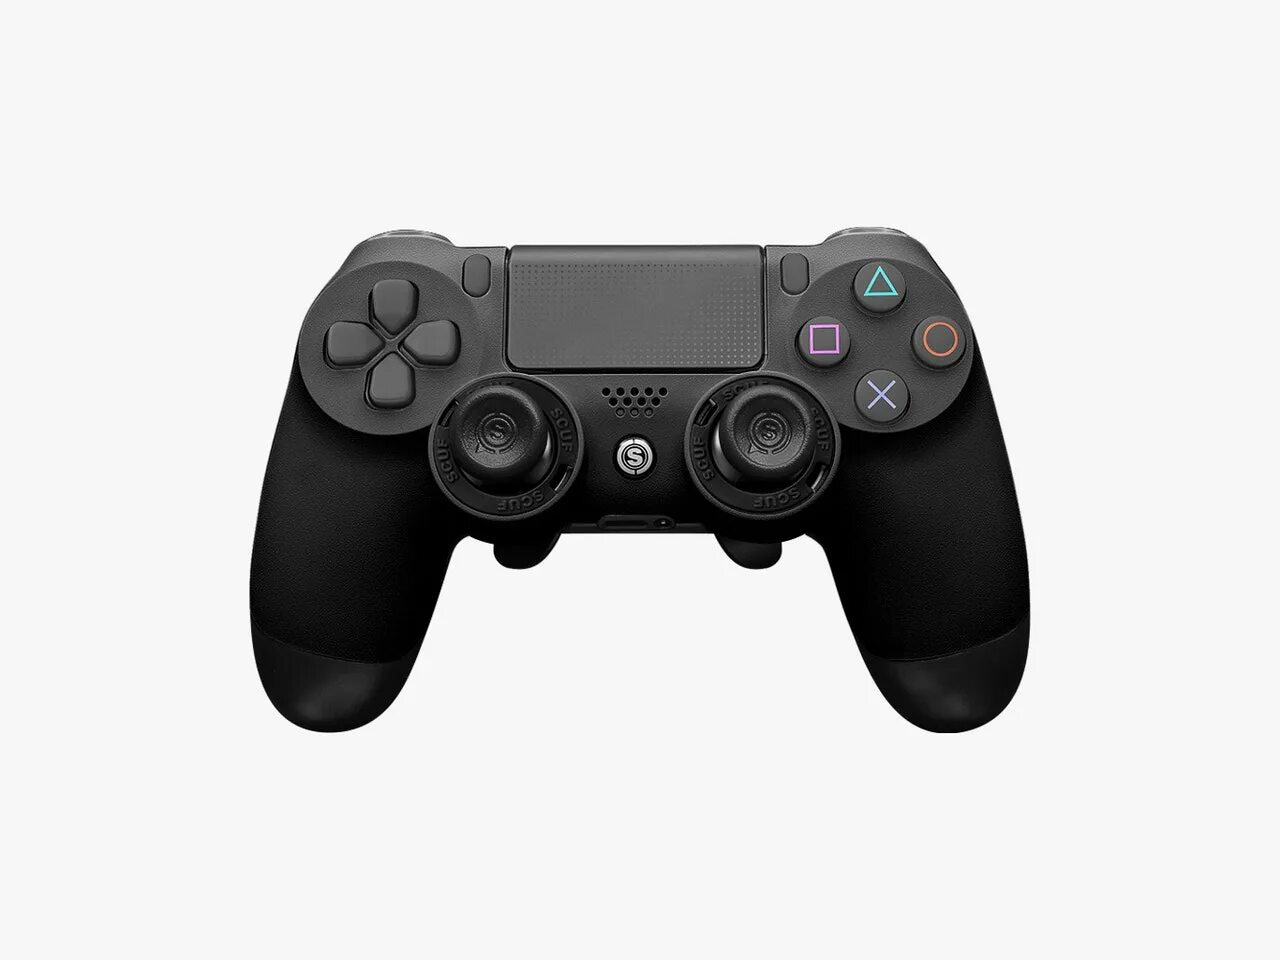 PLAYSTATION 4 Controller. Ps4 Gamepad. Ps5 Pro Controller. Эмулятор джойстика ps4